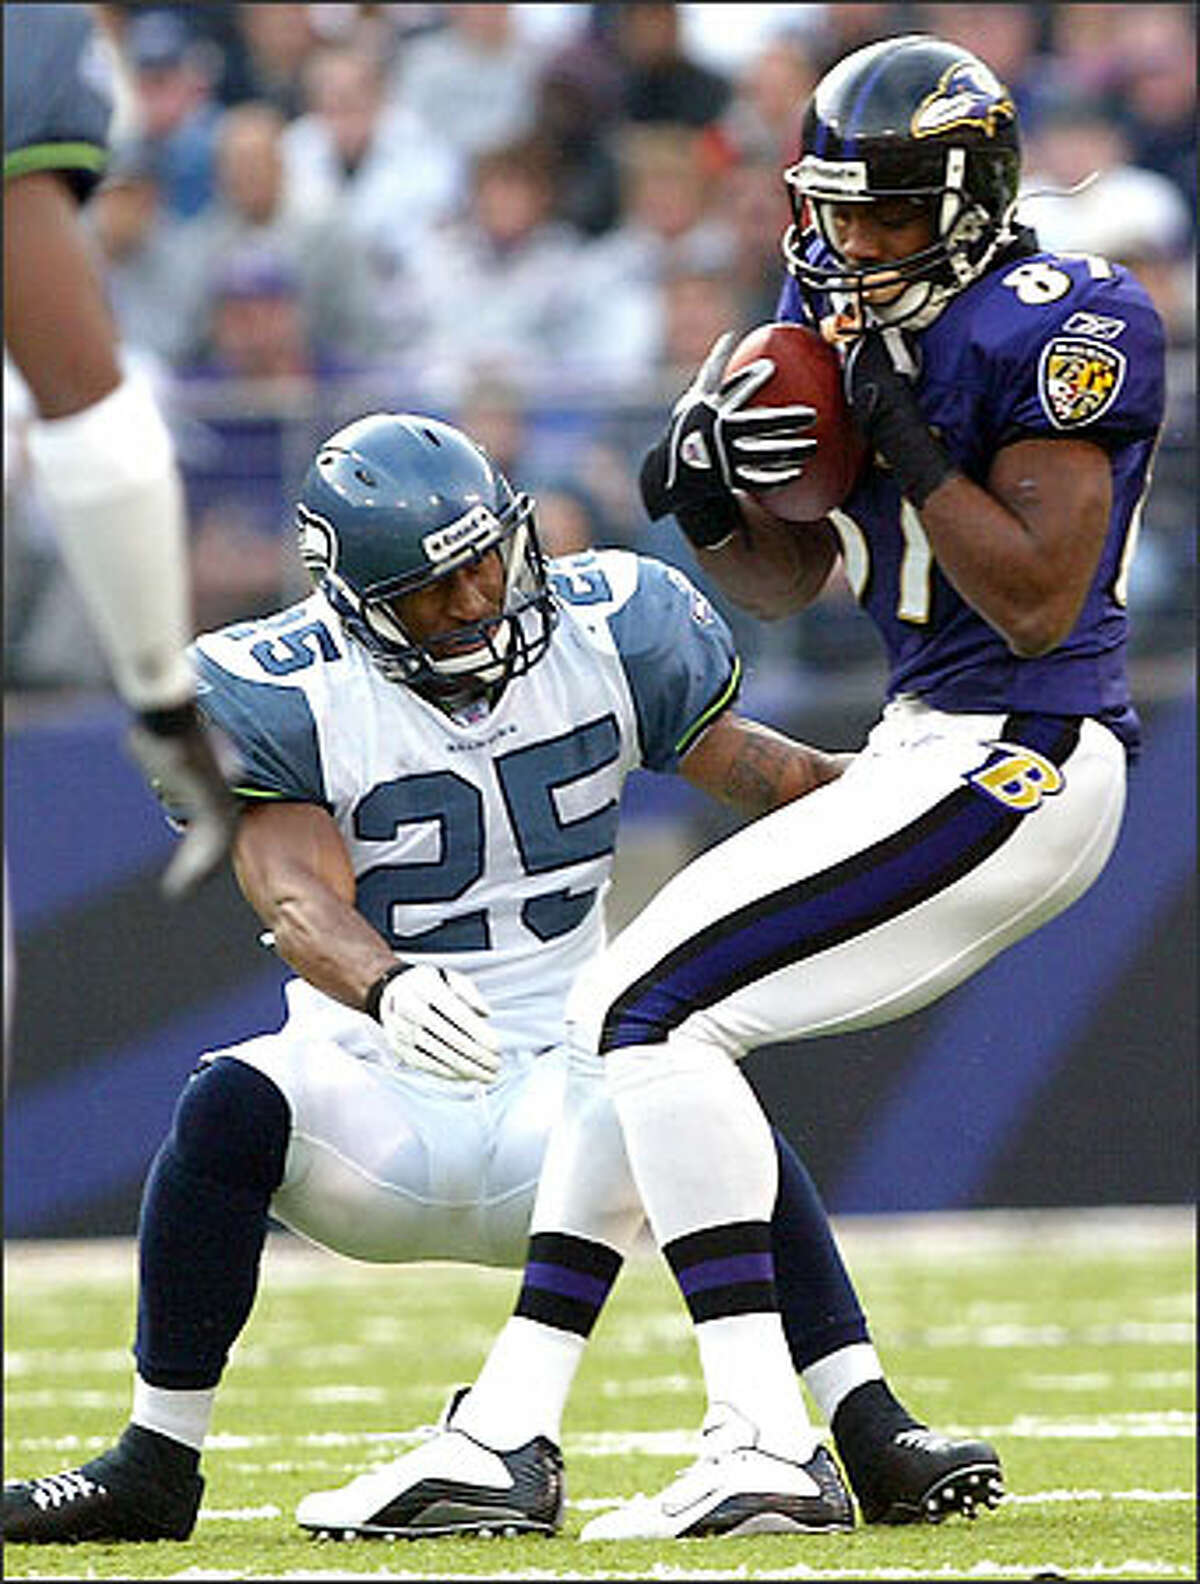 Ravens receiver Marcus Robinson breaks a tackle by Seahawk Reggie Tongue and runs for a 50-yard touchdown during the third quarter. Robinson had nine catches and no TDs in the Ravens' first 10 games; he caught seven and scored four in this outing.